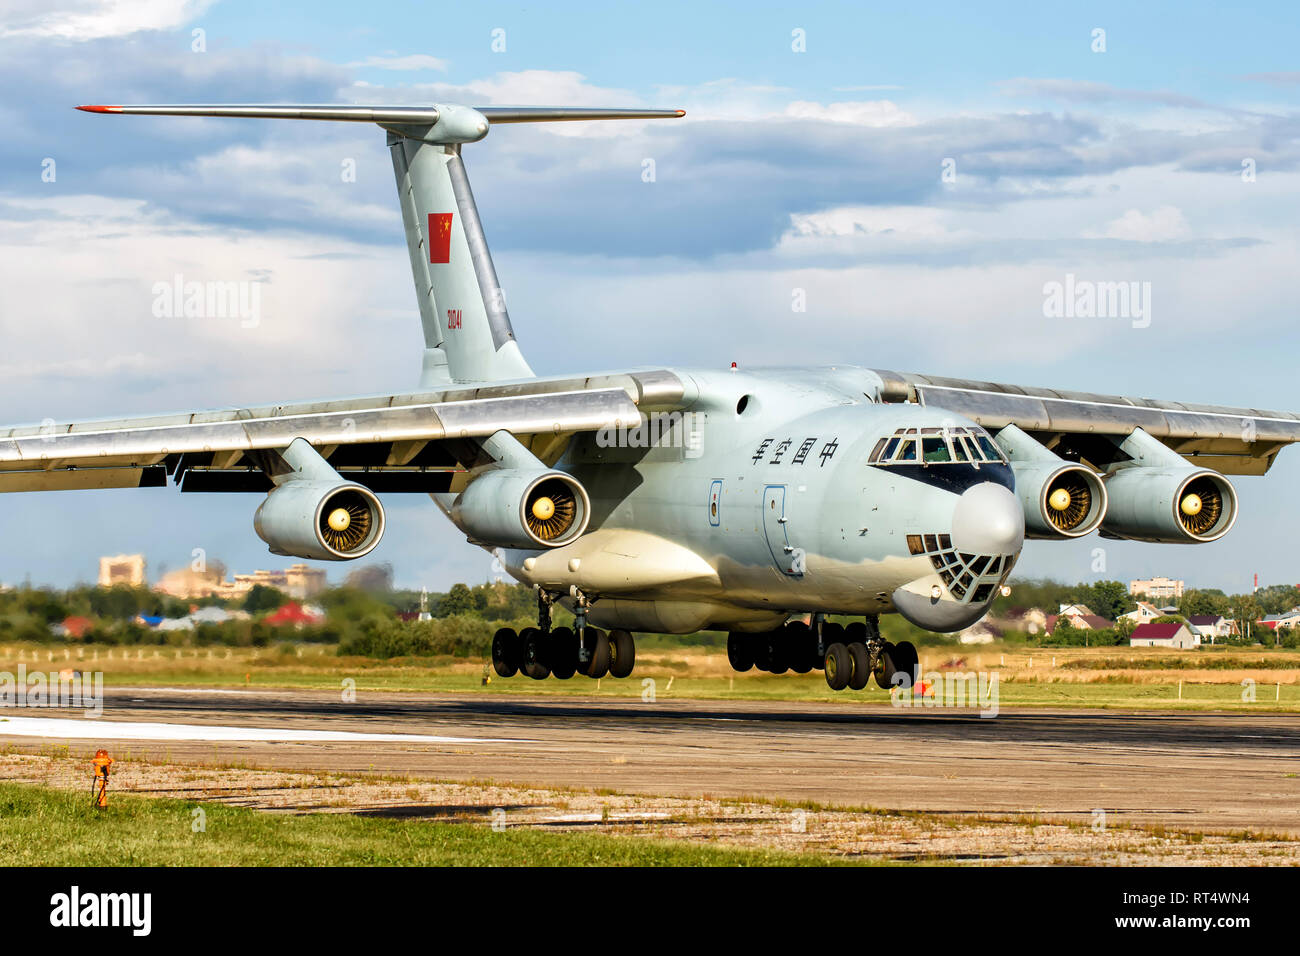 A People's Liberation Army Air Force Il-76TD transport aircraft. Stock Photo